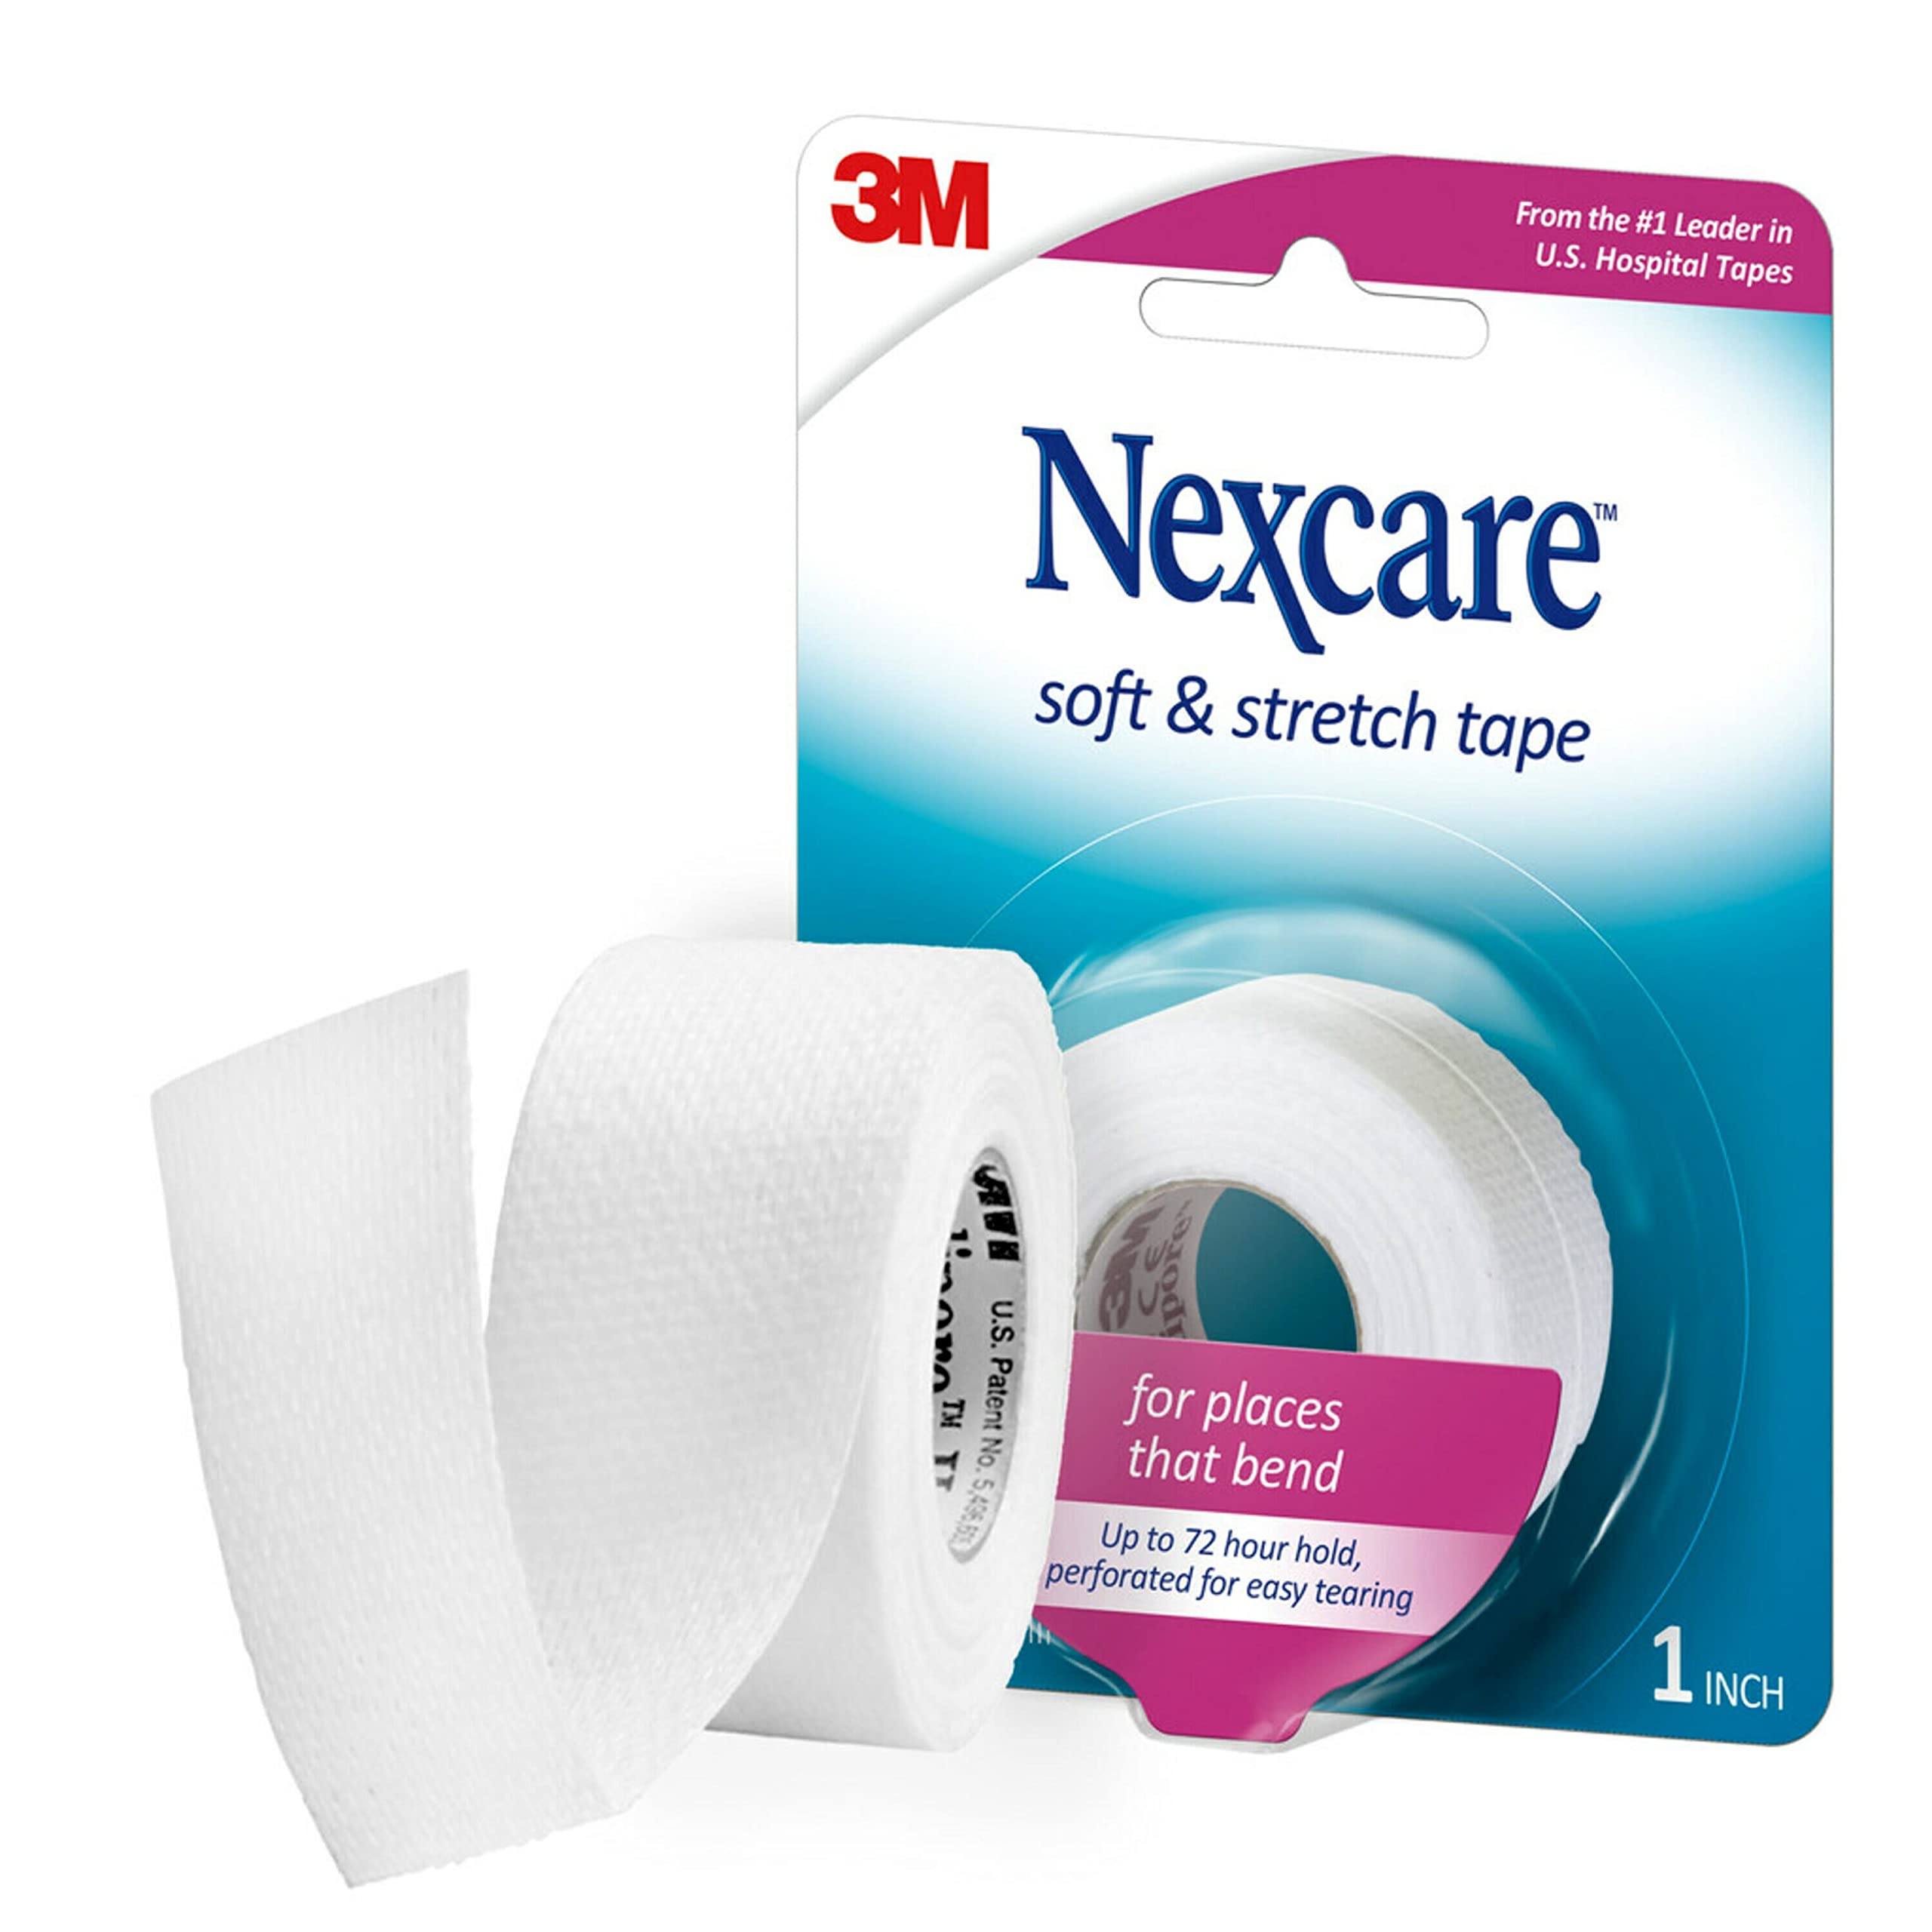 3m Nexcare 1 Inch Flexible Clear Surgical Tape 2 rolls